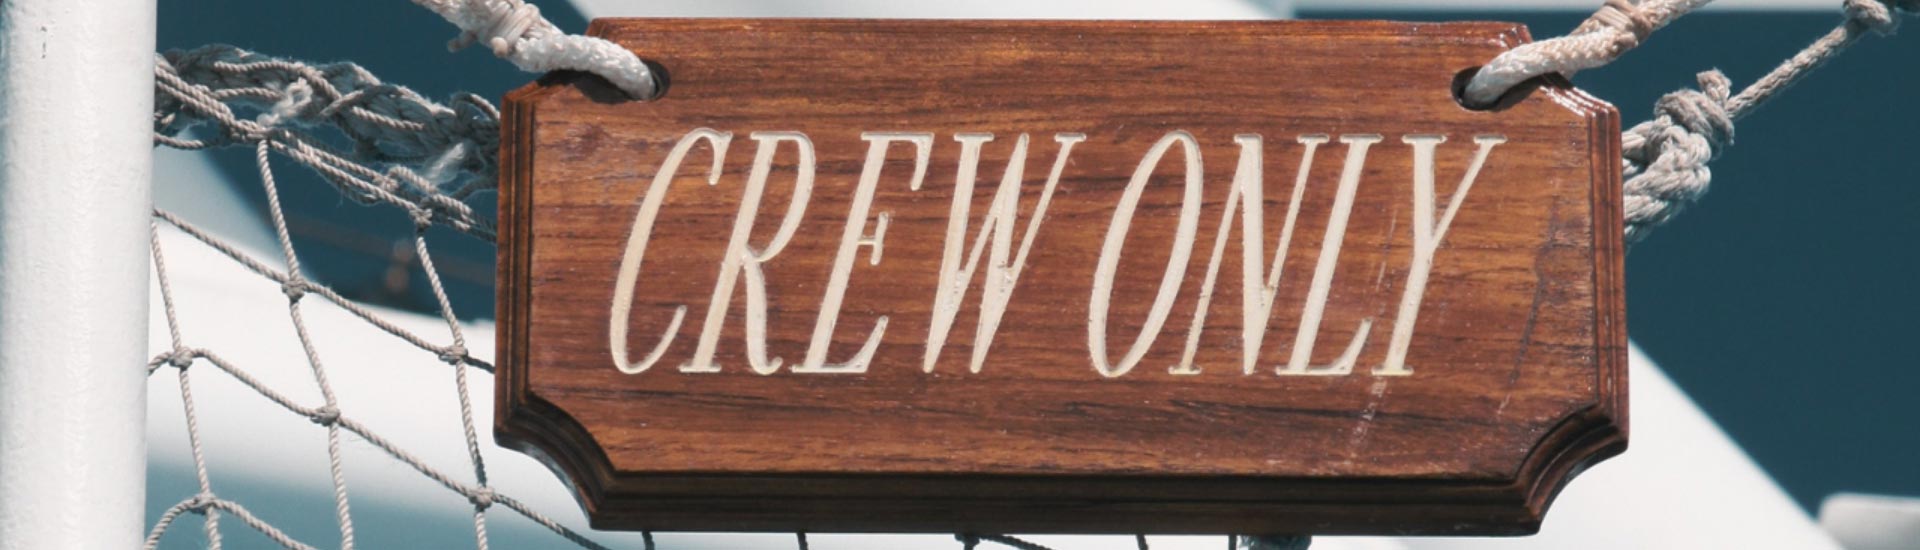 crew-only-sign